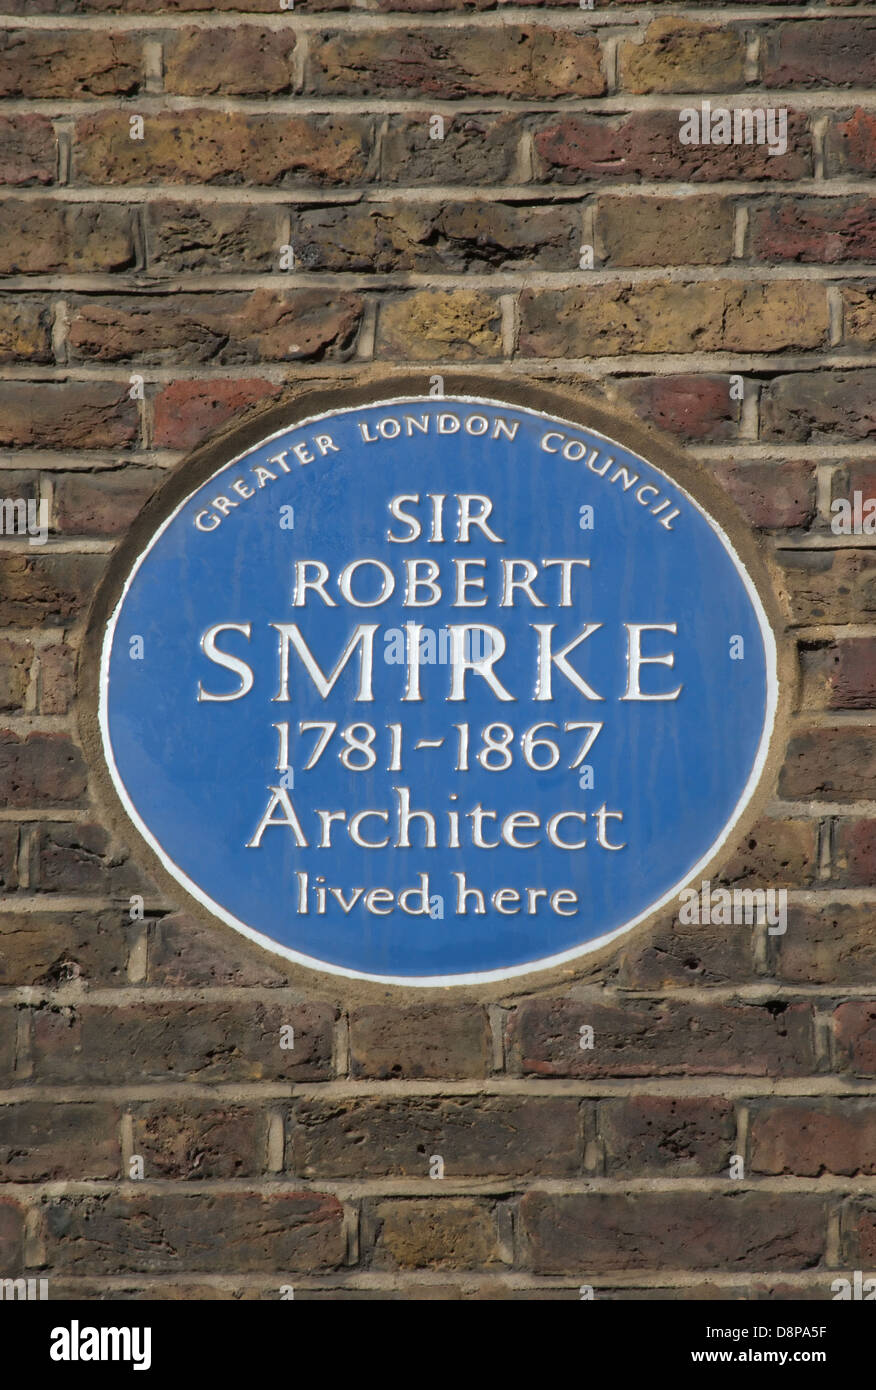 greater london council blue plaque marking a home of architect sir robert smirke, fitzrovia, london, england Stock Photo